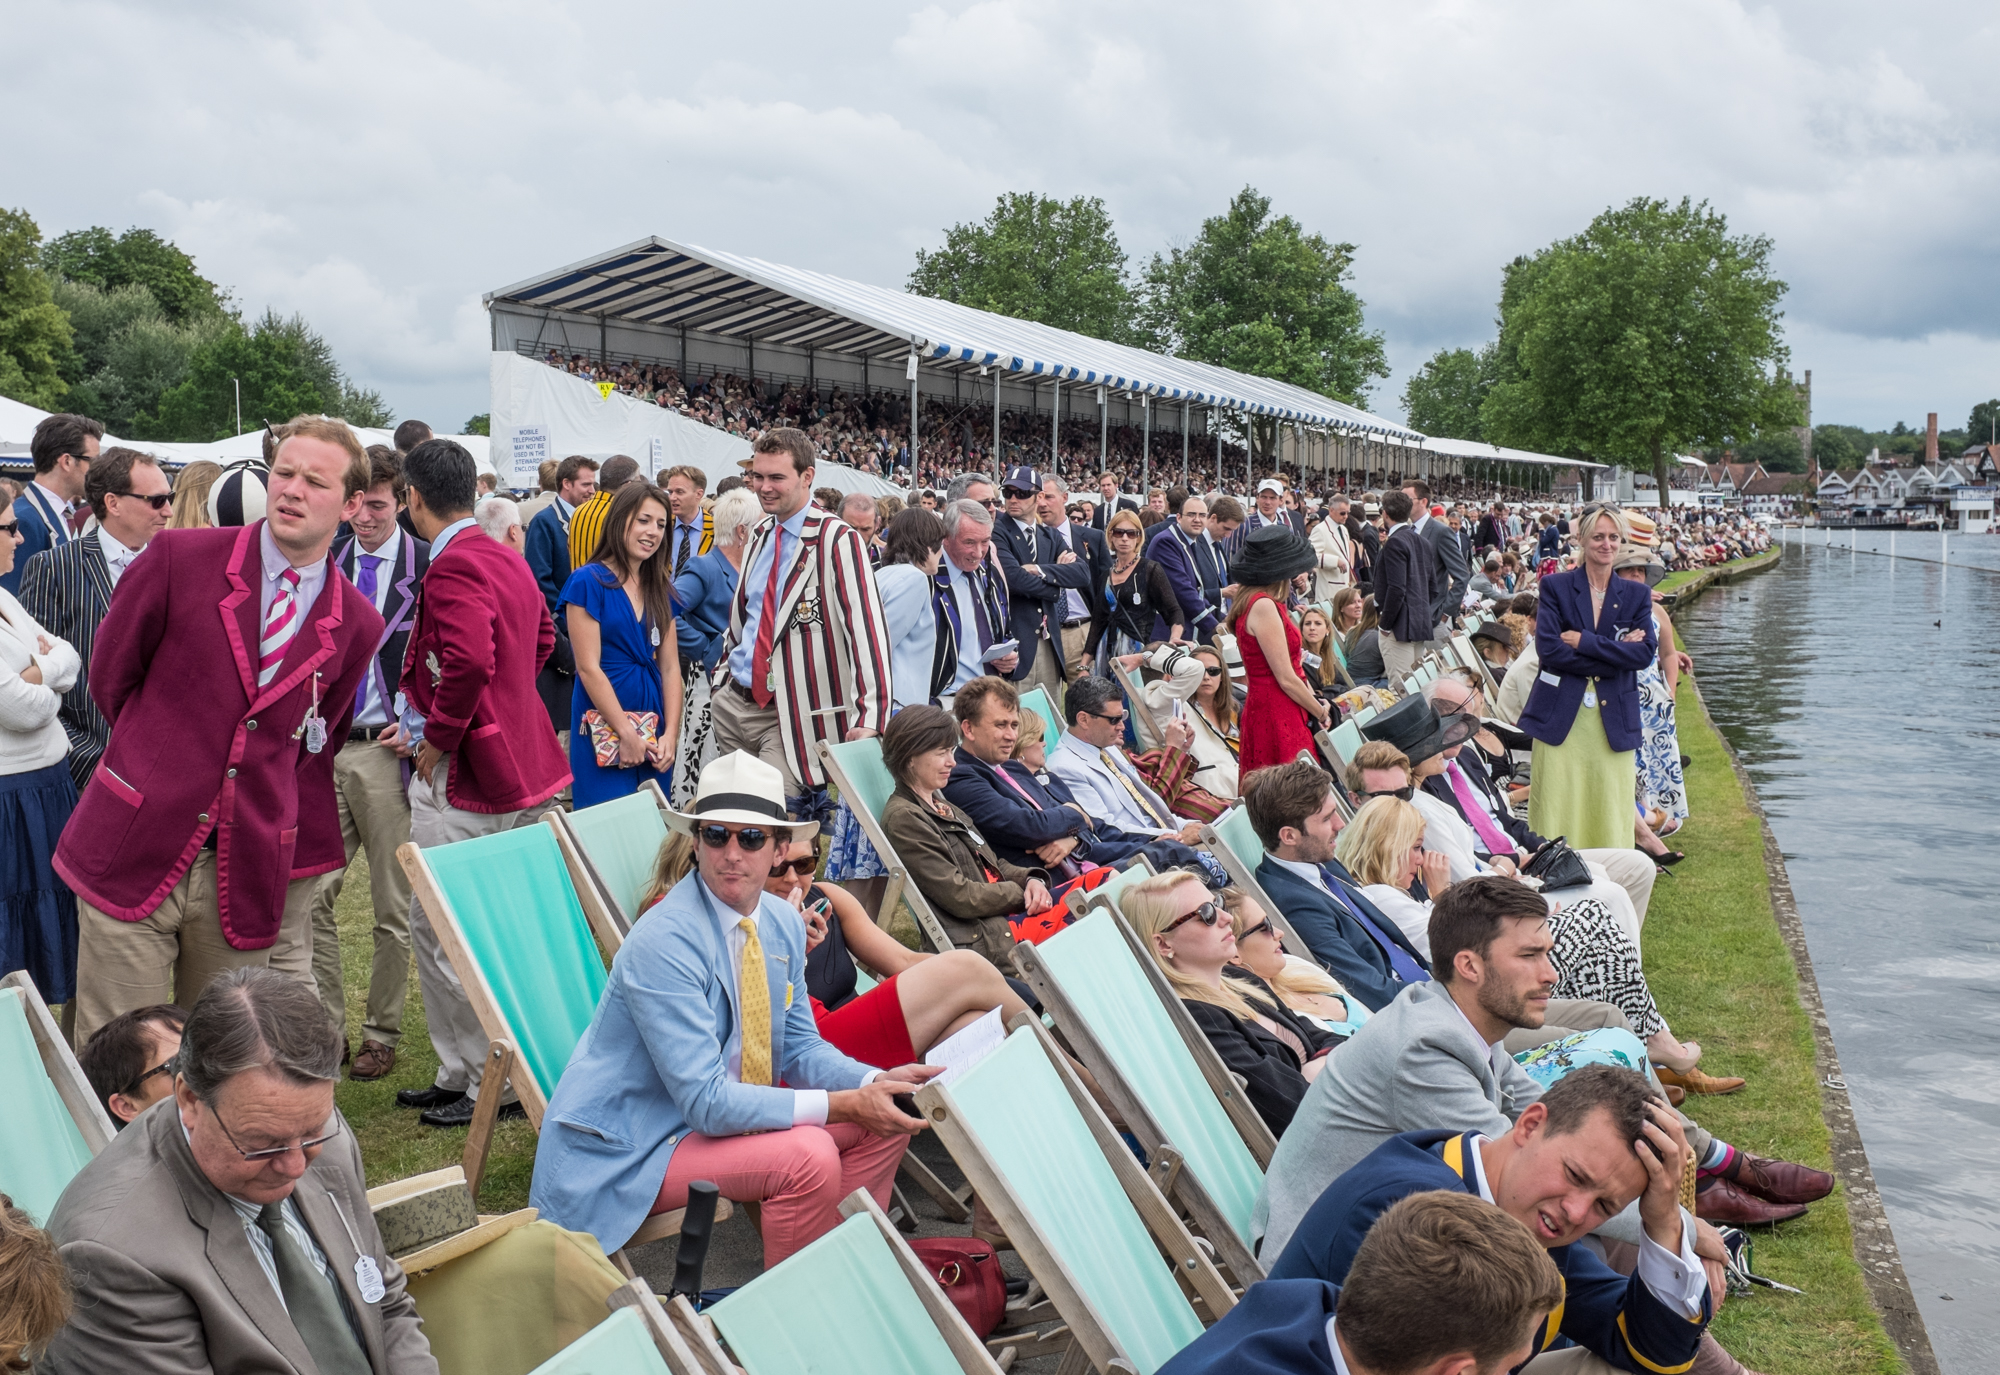  Spectators in the Steward's Enclosure line the banks at Henley Royal Regatta. A strict dress code applies: Jacket and tie for men, skirts or dresses below the knee for women. 